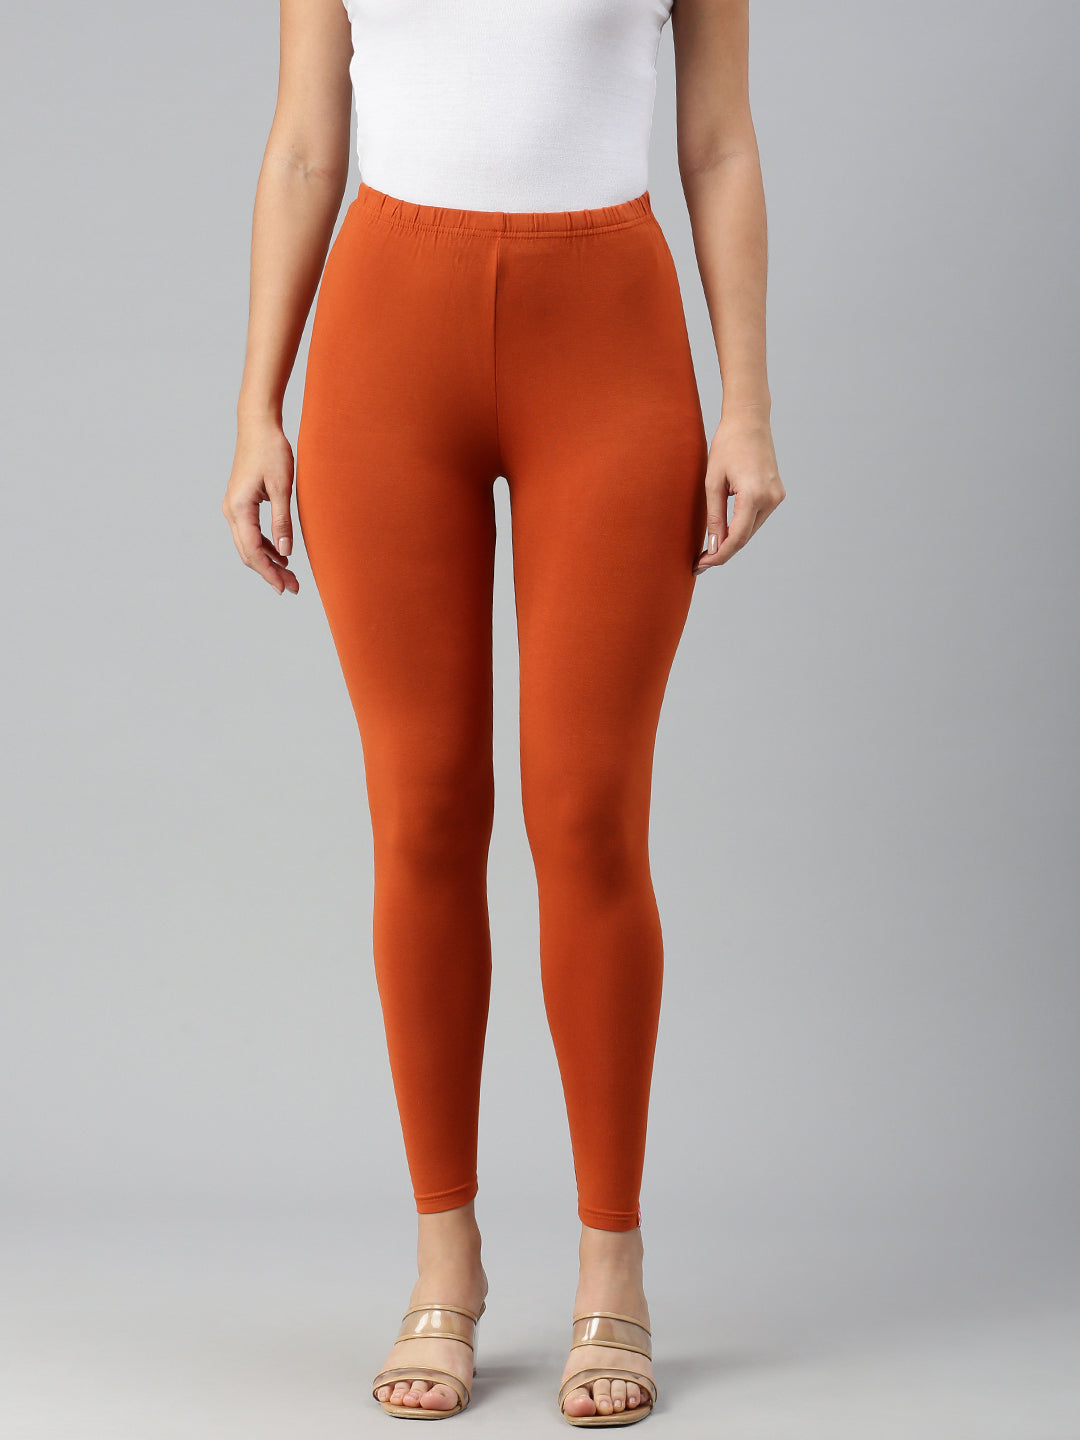 Spice up your Style with Prisma's Ankle Leggings